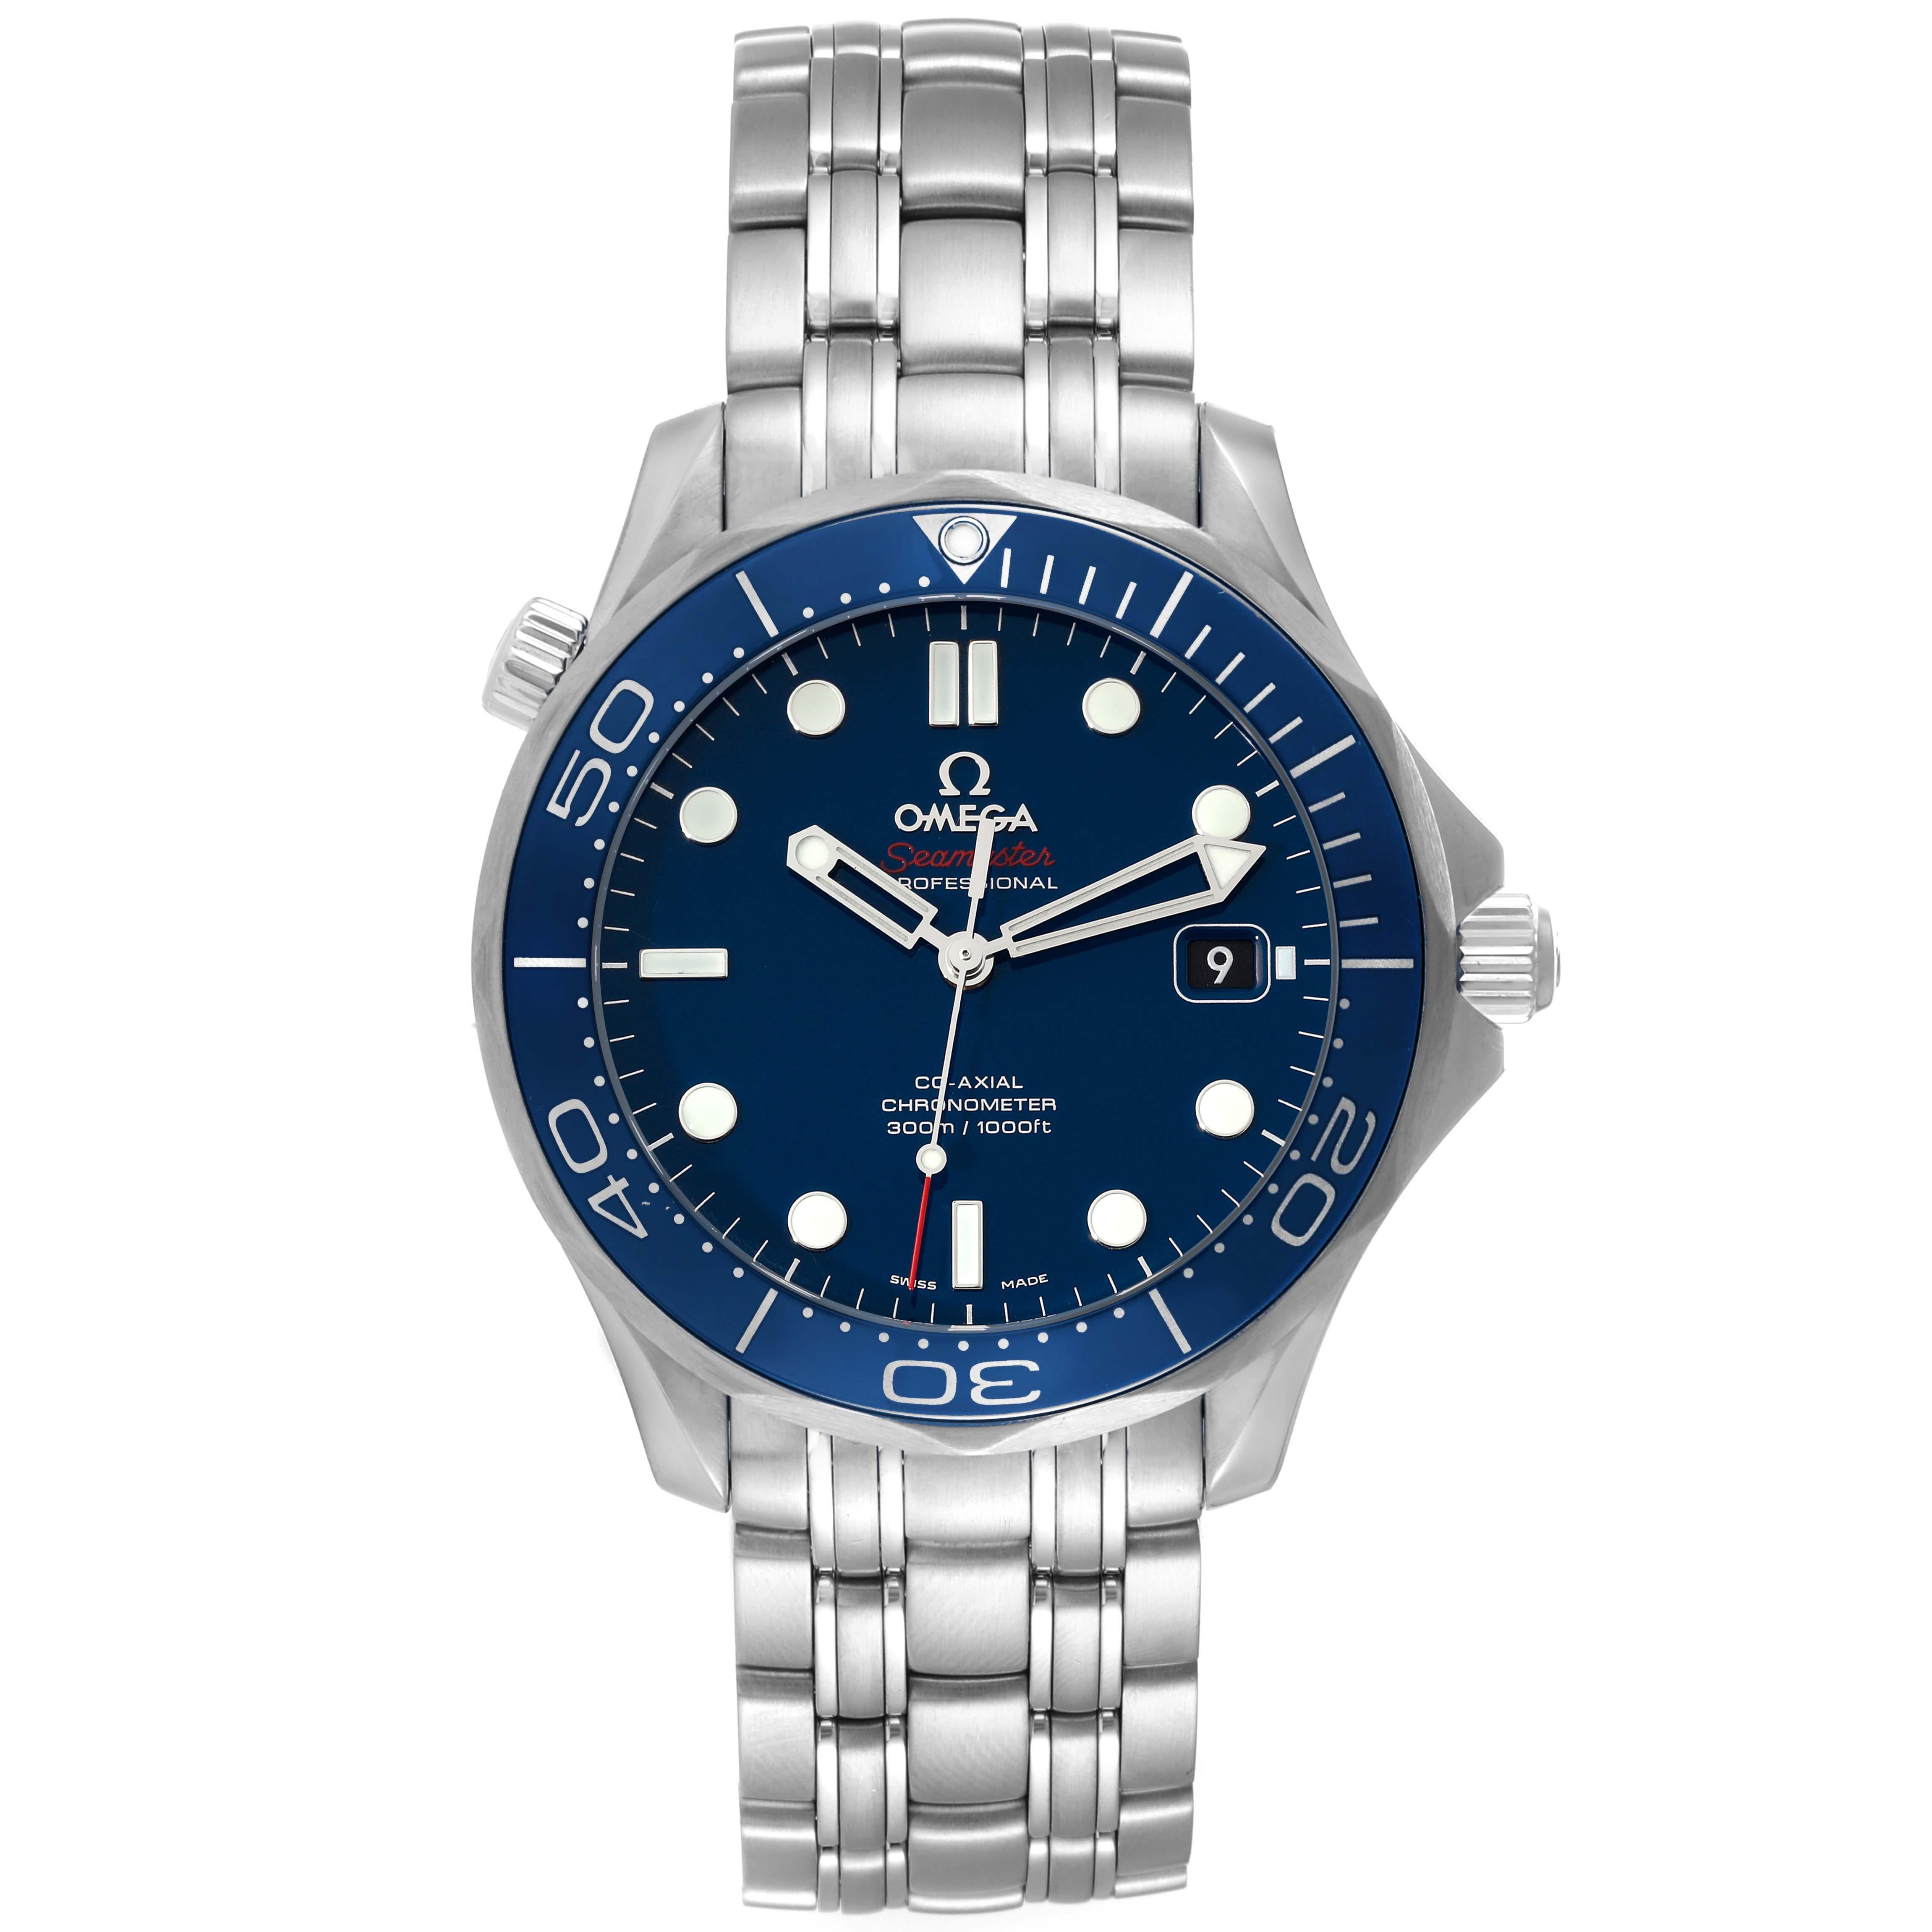 Omega Seamaster Diver 300M Co-Axial Steel Mens Watch 212.30.41.20.03.001. Automatic self-winding chronometer, Co-Axial Escapement movement with rhodium-plated finish. Stainless steel case 41.0 mm in diameter. Helium escape valve at 10 o'clock. Omega